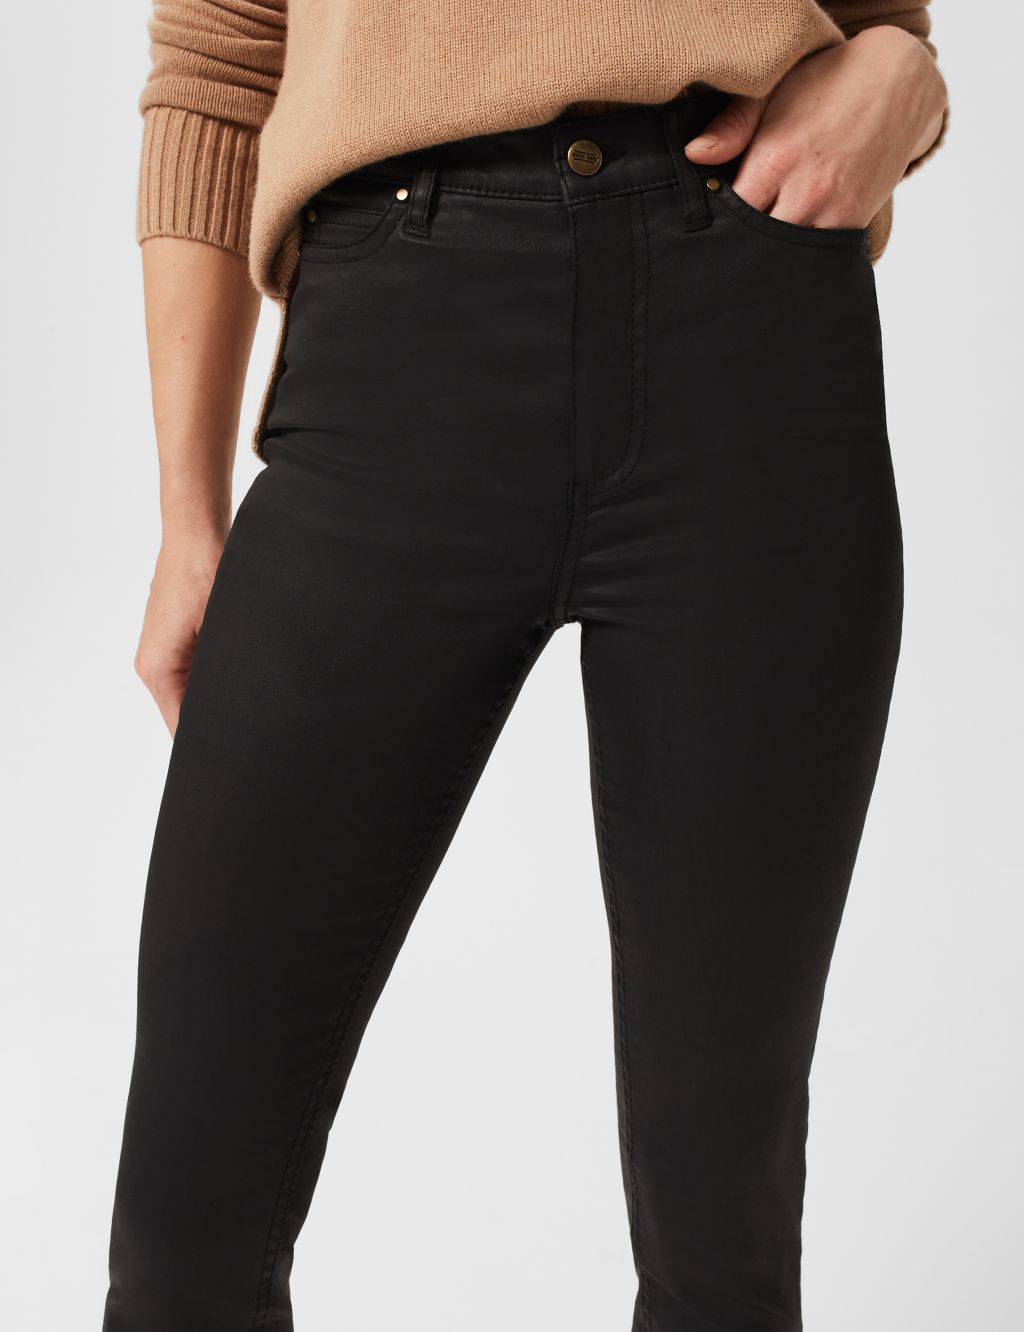 Coated Slim Fit Jeans image 2